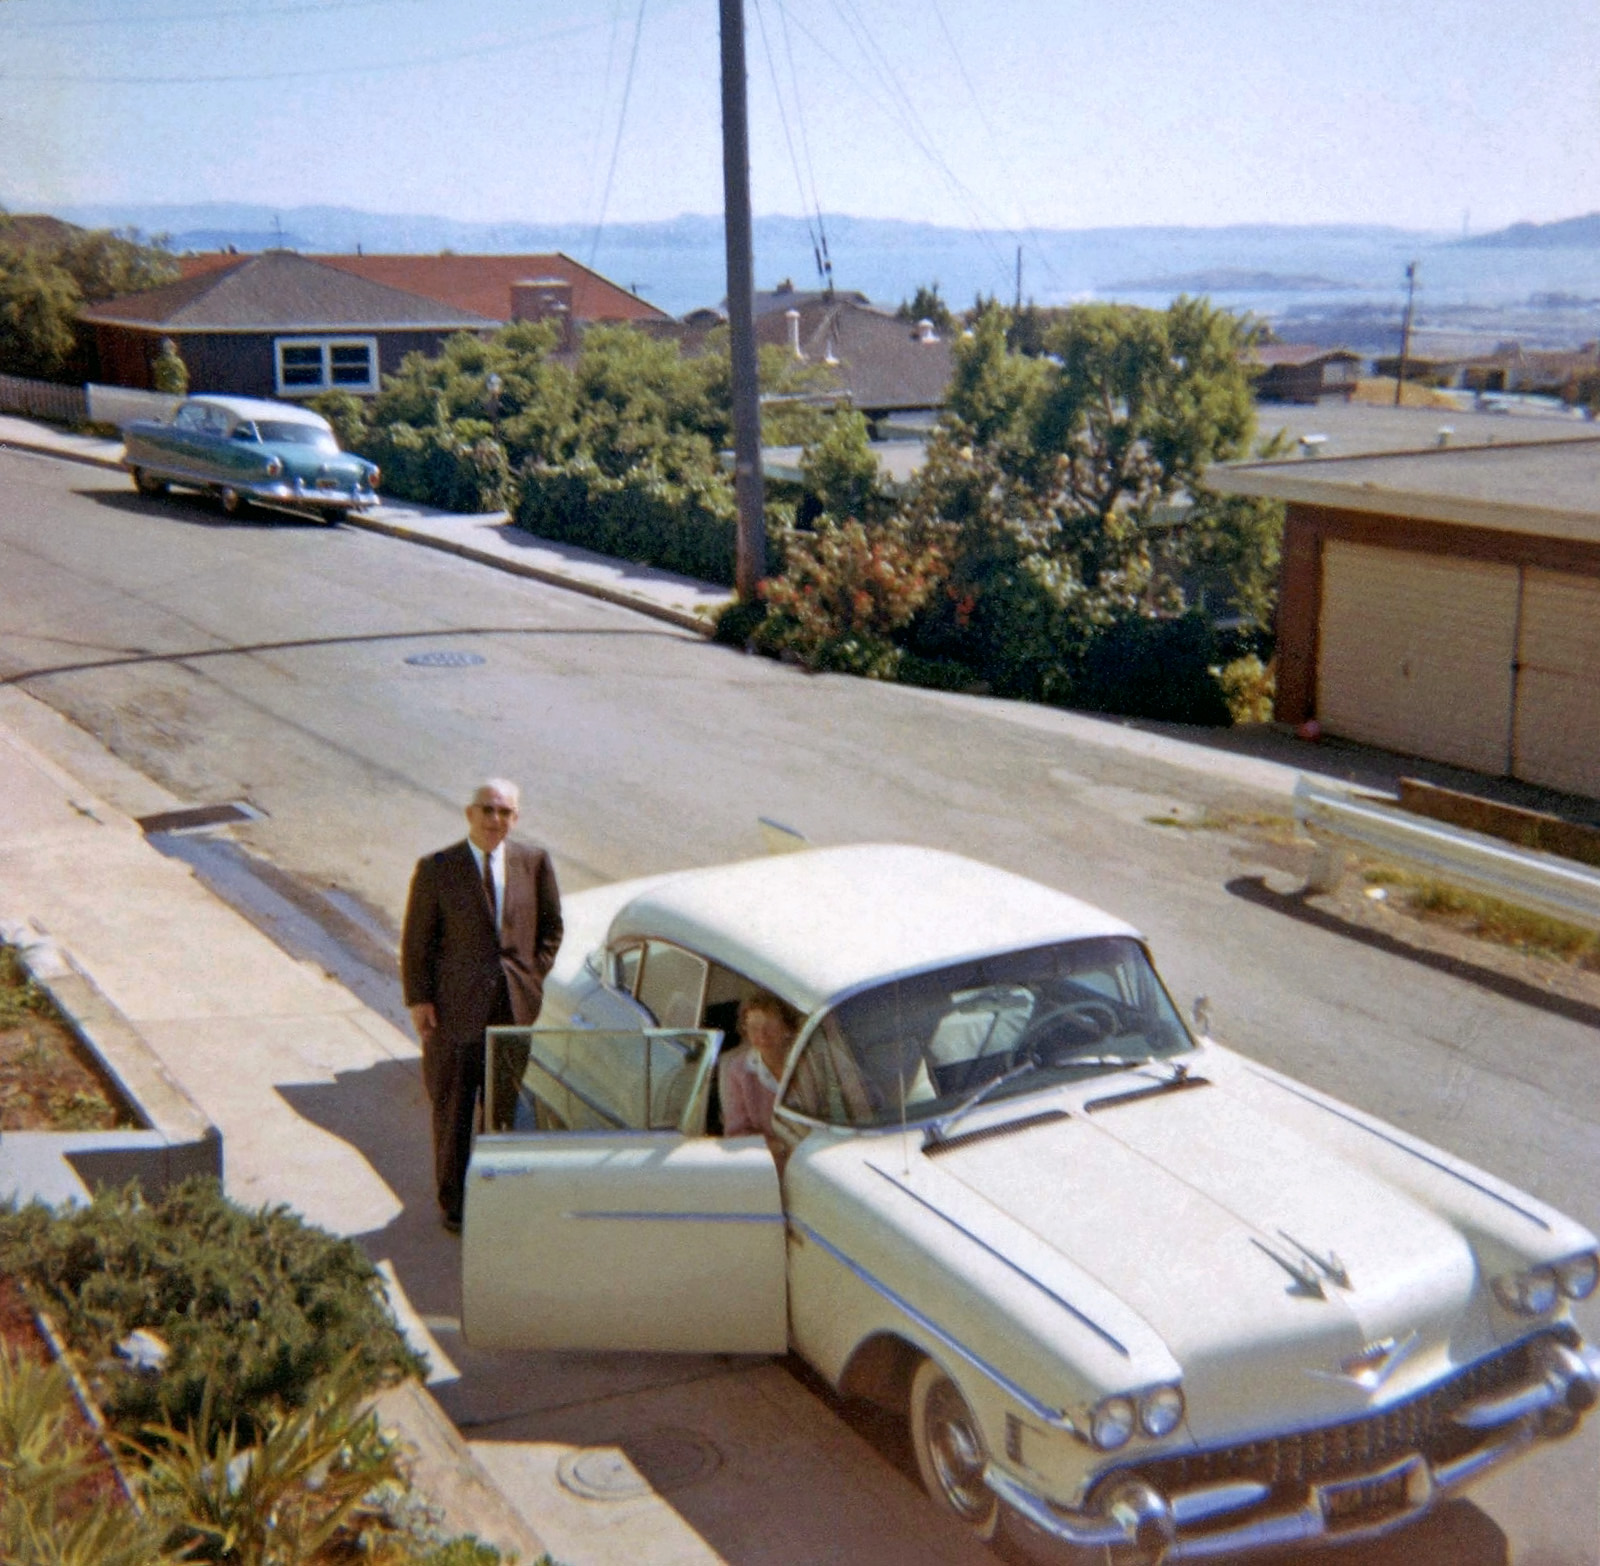 My mother's parents are seen here getting ready to drive home to Sacramento after a weekend visit in 1964. We lived in the San Francisco East Bay hills for over 20 years and this house had a wonderful panoramic view of the Bay.  San Francisco can be seen in the left distance as can the Golden Gate Bridge in the distance at right.  Grandpa's car was a 1958 Cadillac - he was a Cadillac man for years. The car down the street is a c.1954 Nash Ambassador.  As a toddler I would stand out on our deck and stare out at that incredible view. View full size.